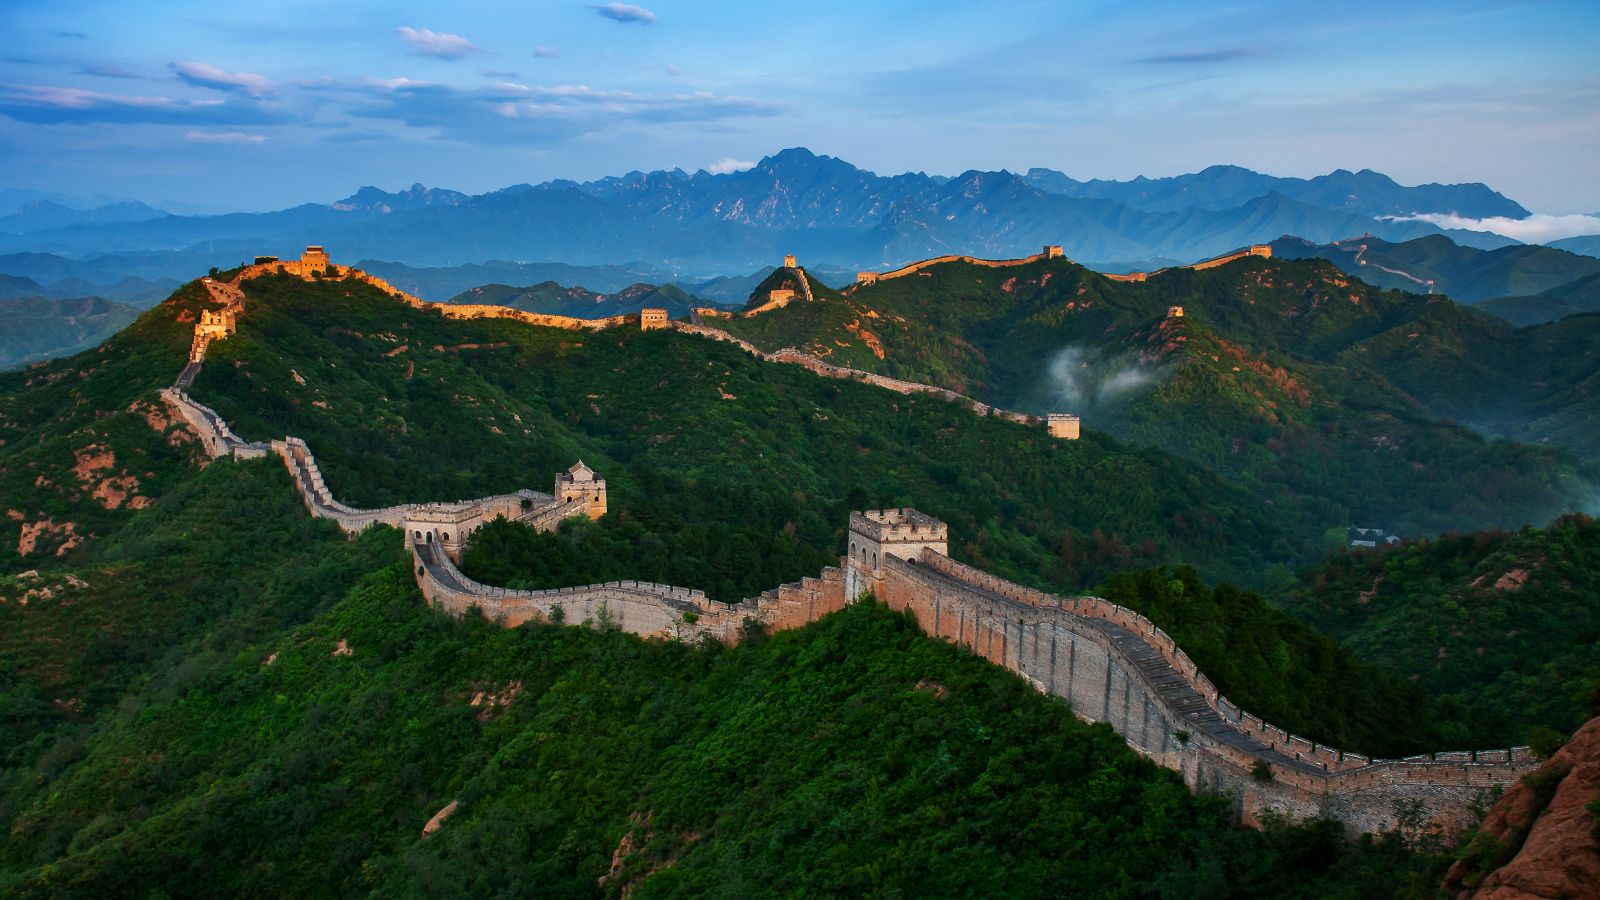 Appreciate the Great Wall from a Distance